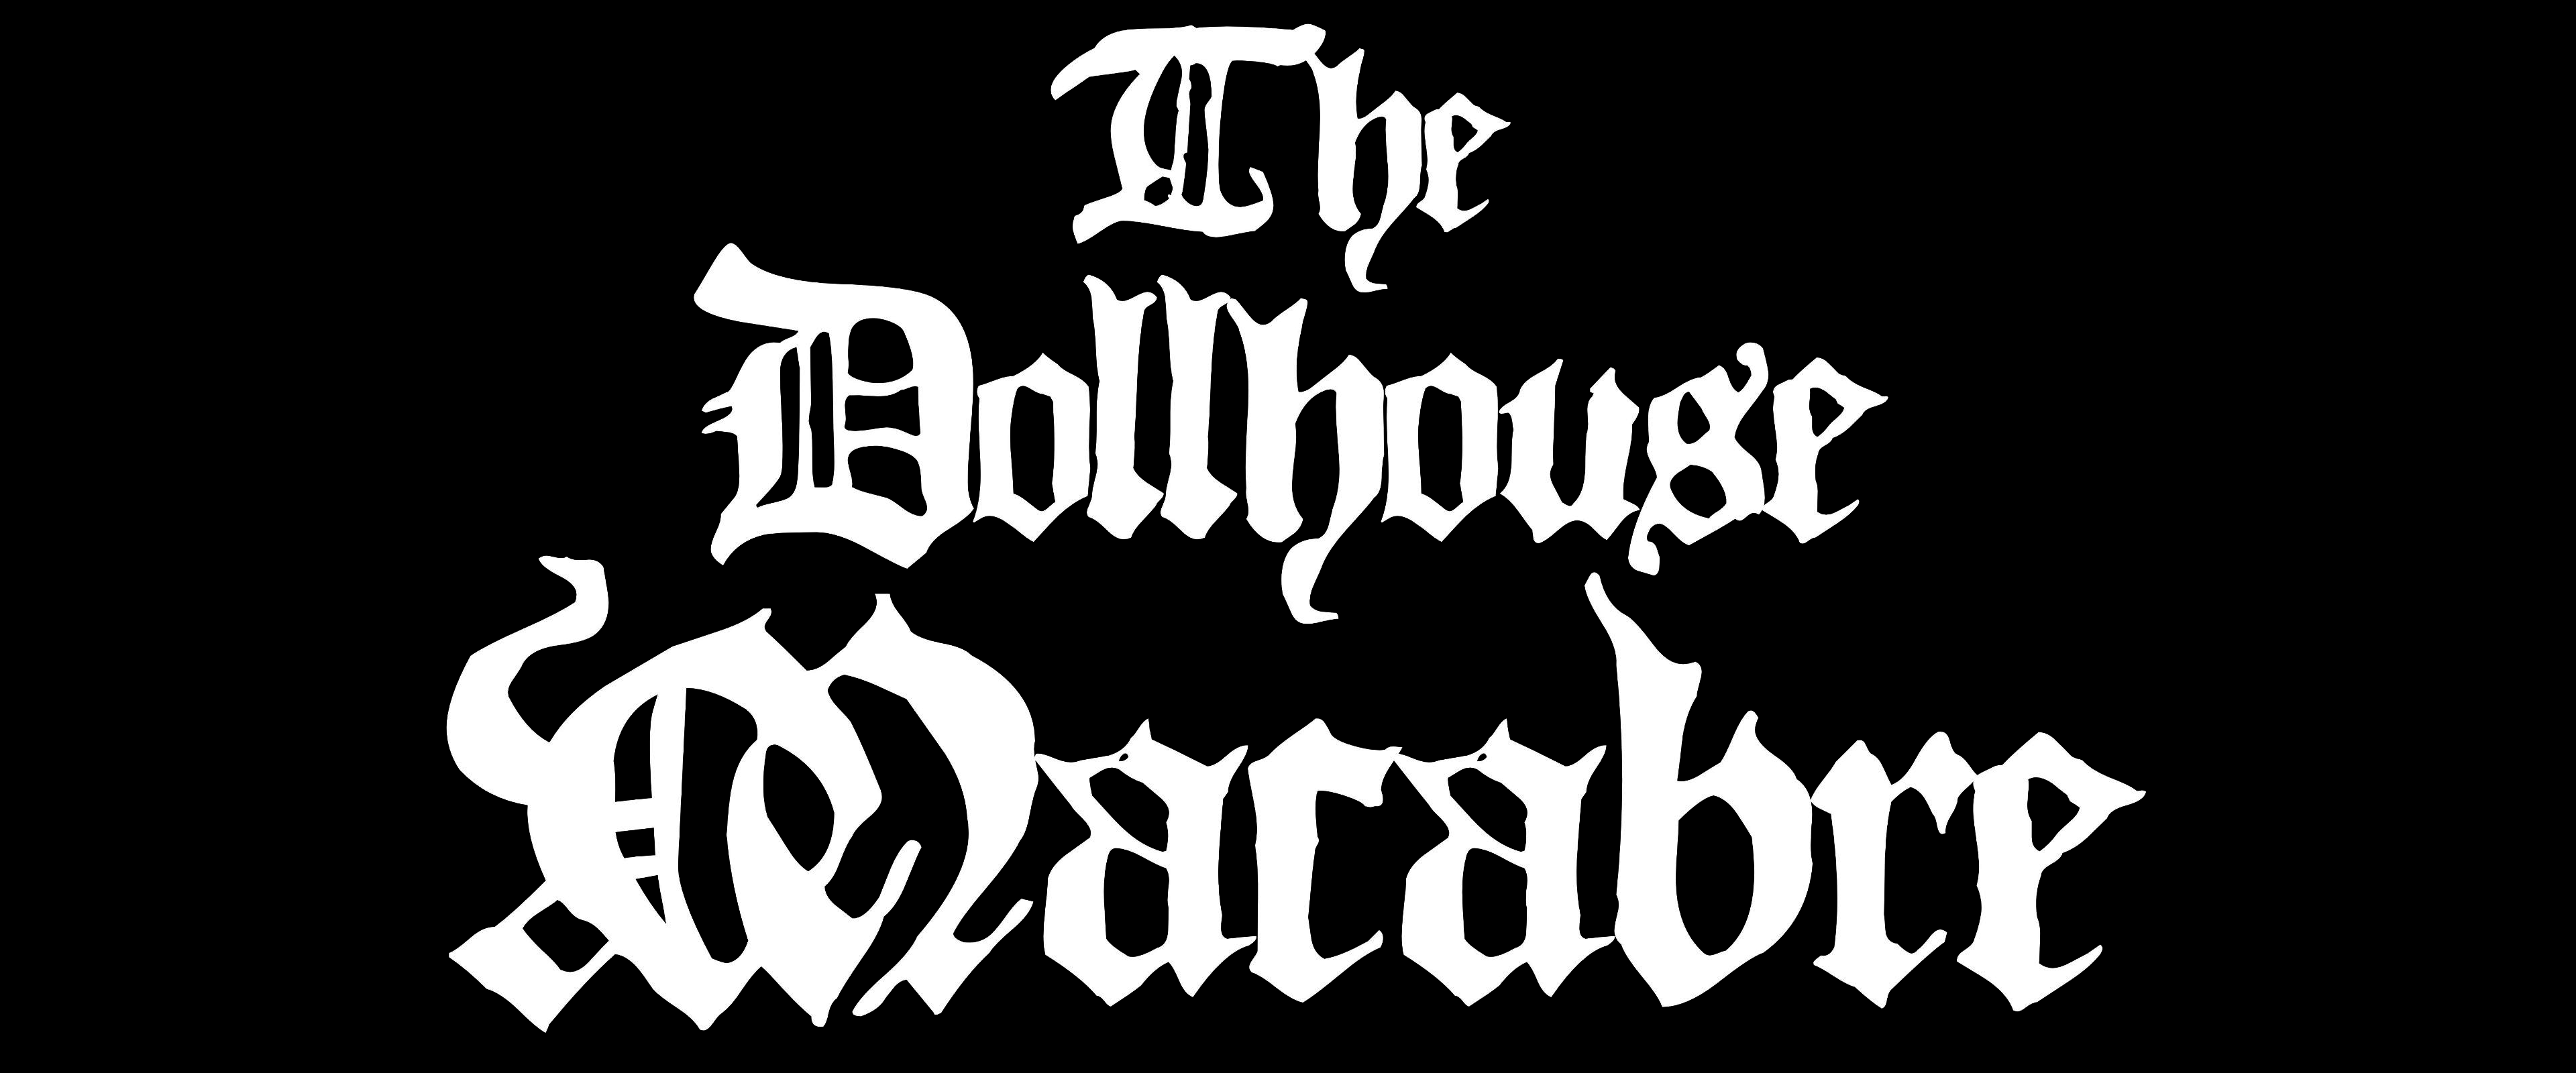 The Dollhouse Macabre - Whitechapel Occult Society Supplement